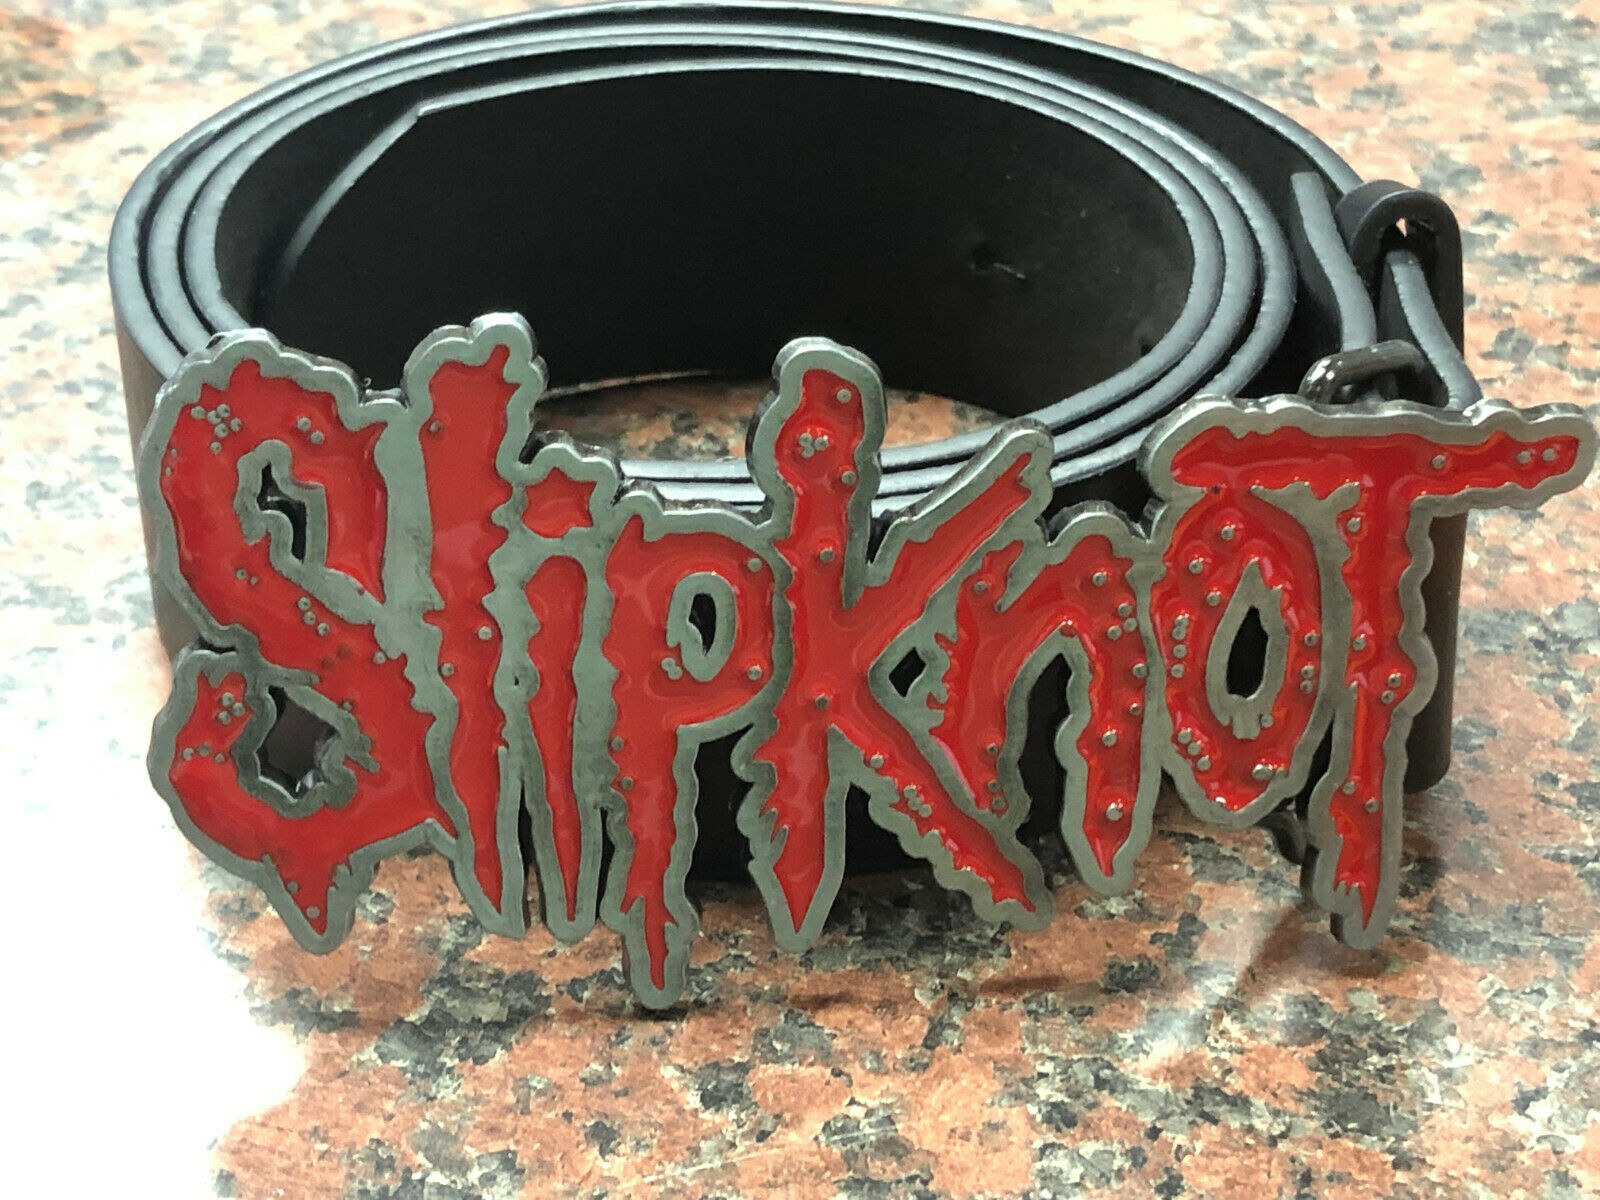 belt with a large Slipknot buckle